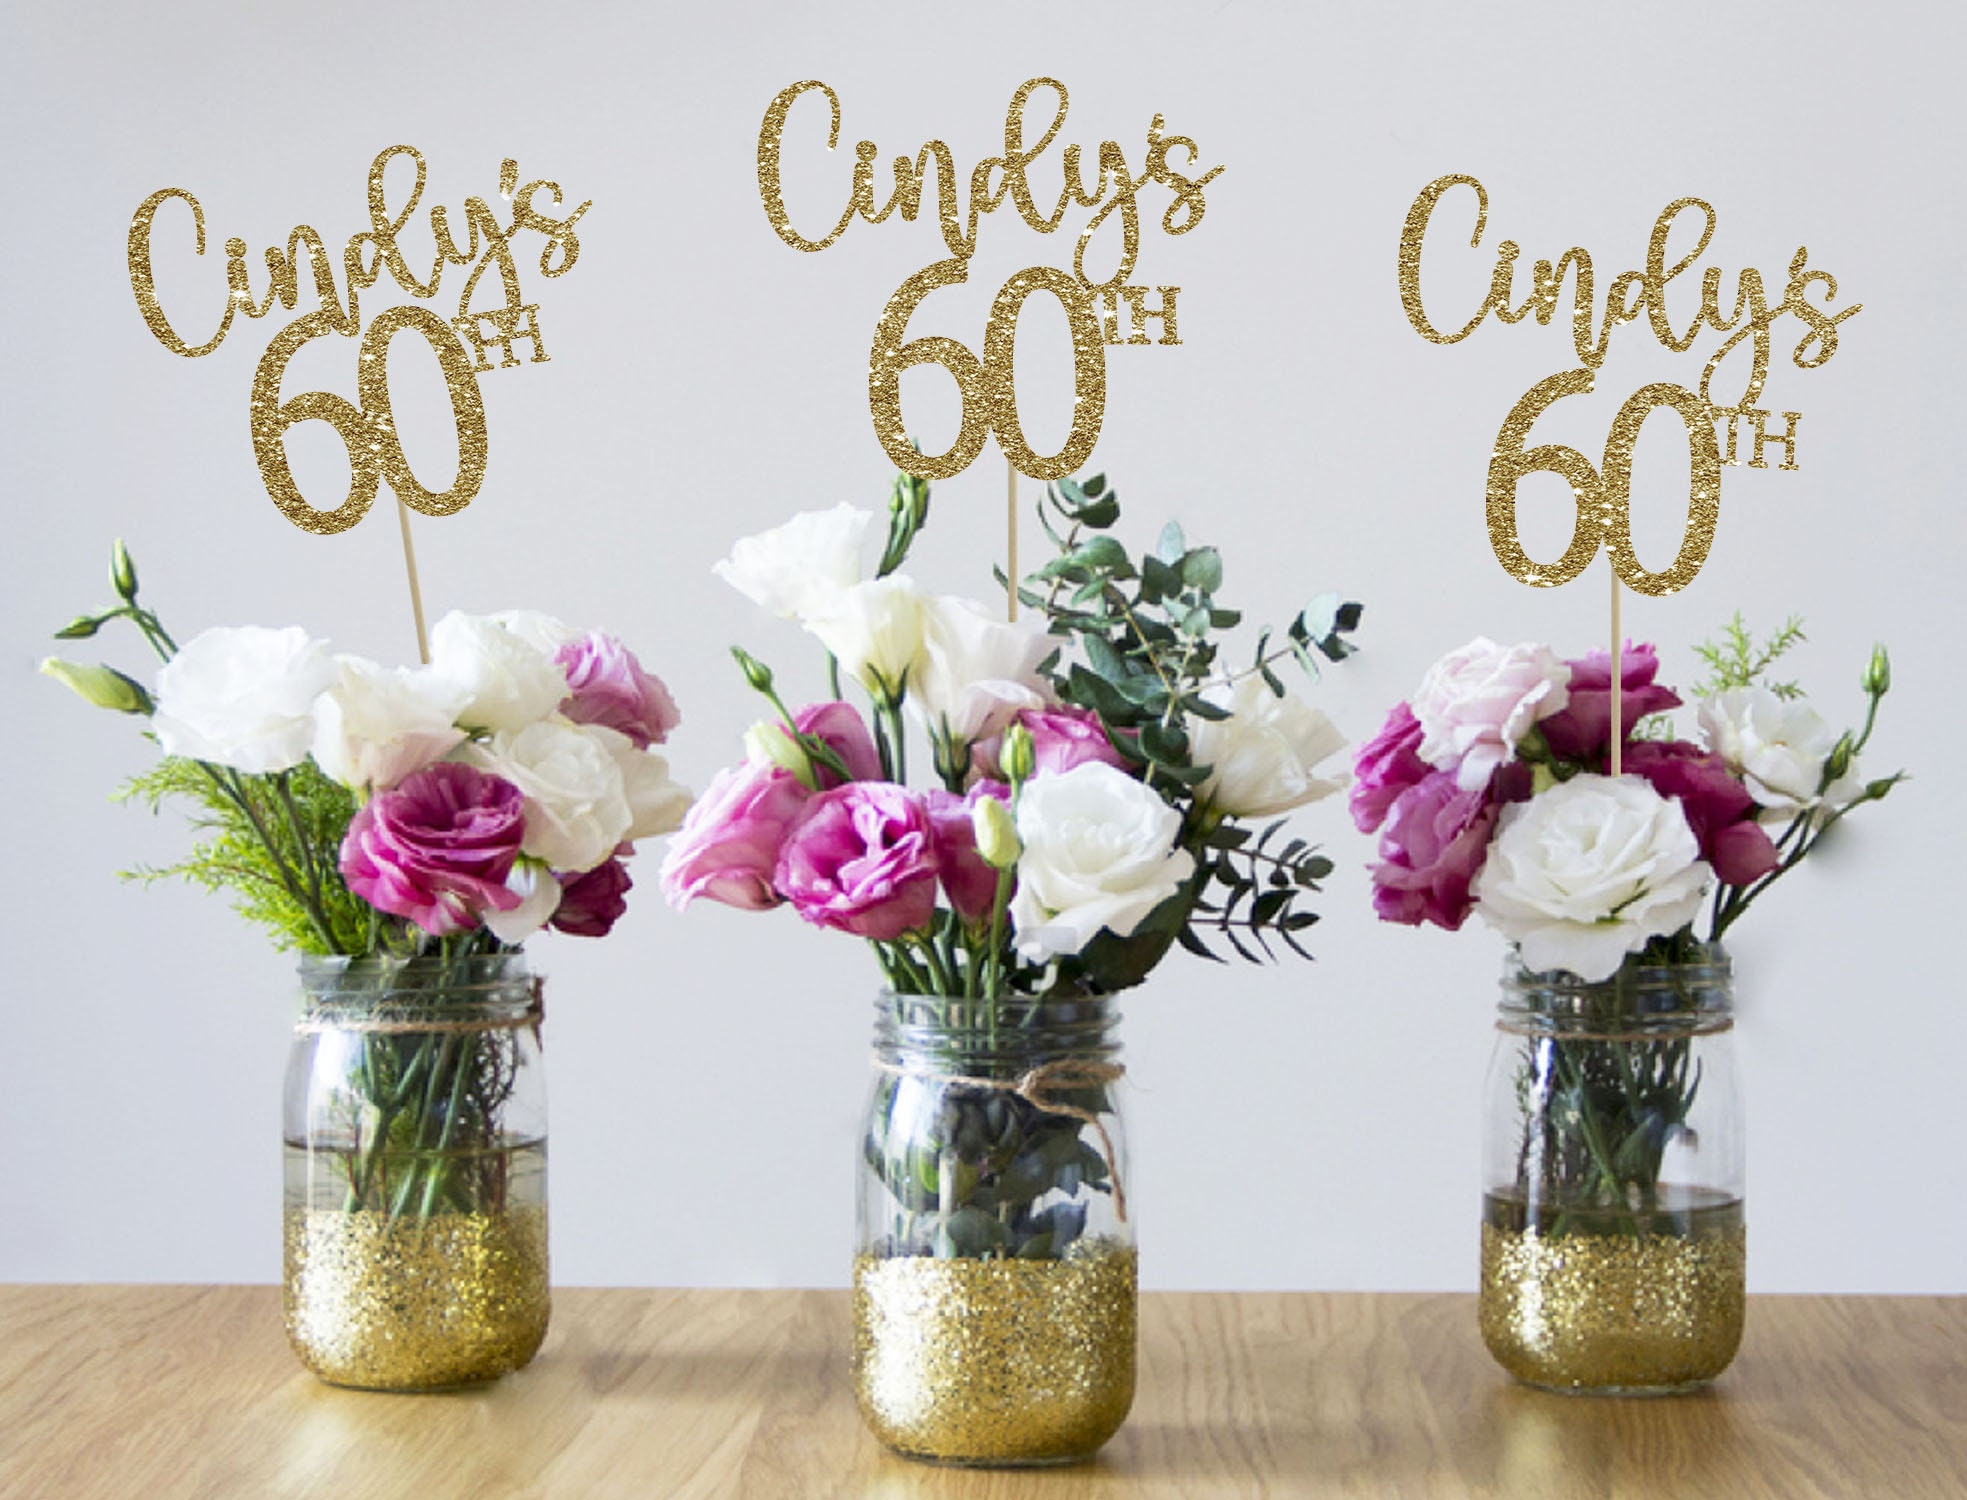 60th Birthday Centerpieces 60th Centerpieces 60th Birthday - Etsy